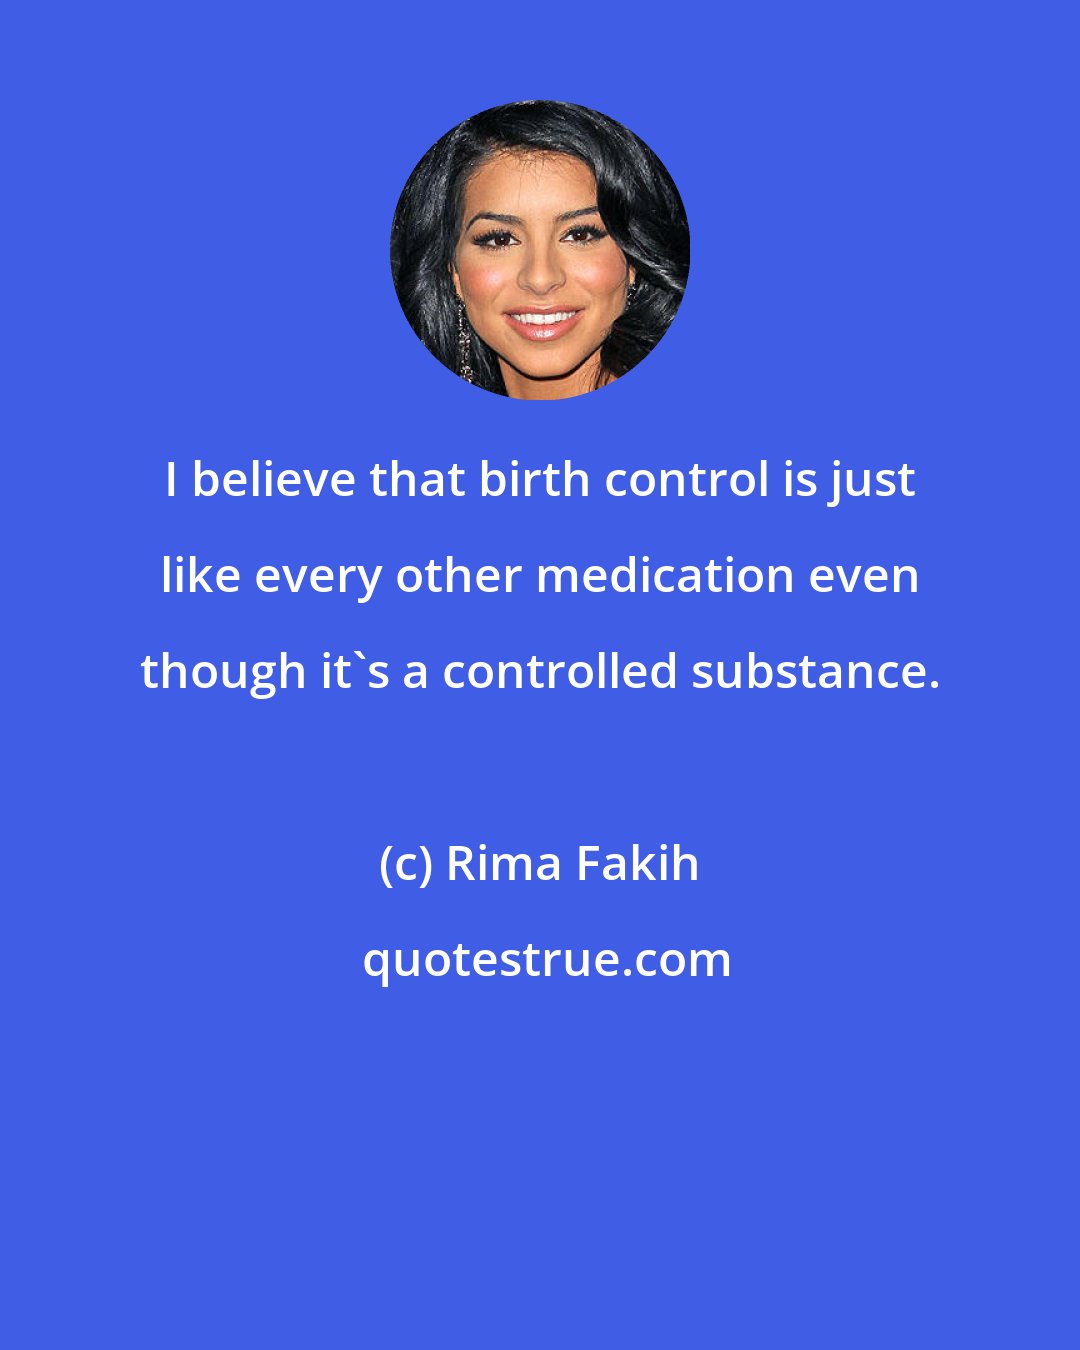 Rima Fakih: I believe that birth control is just like every other medication even though it's a controlled substance.